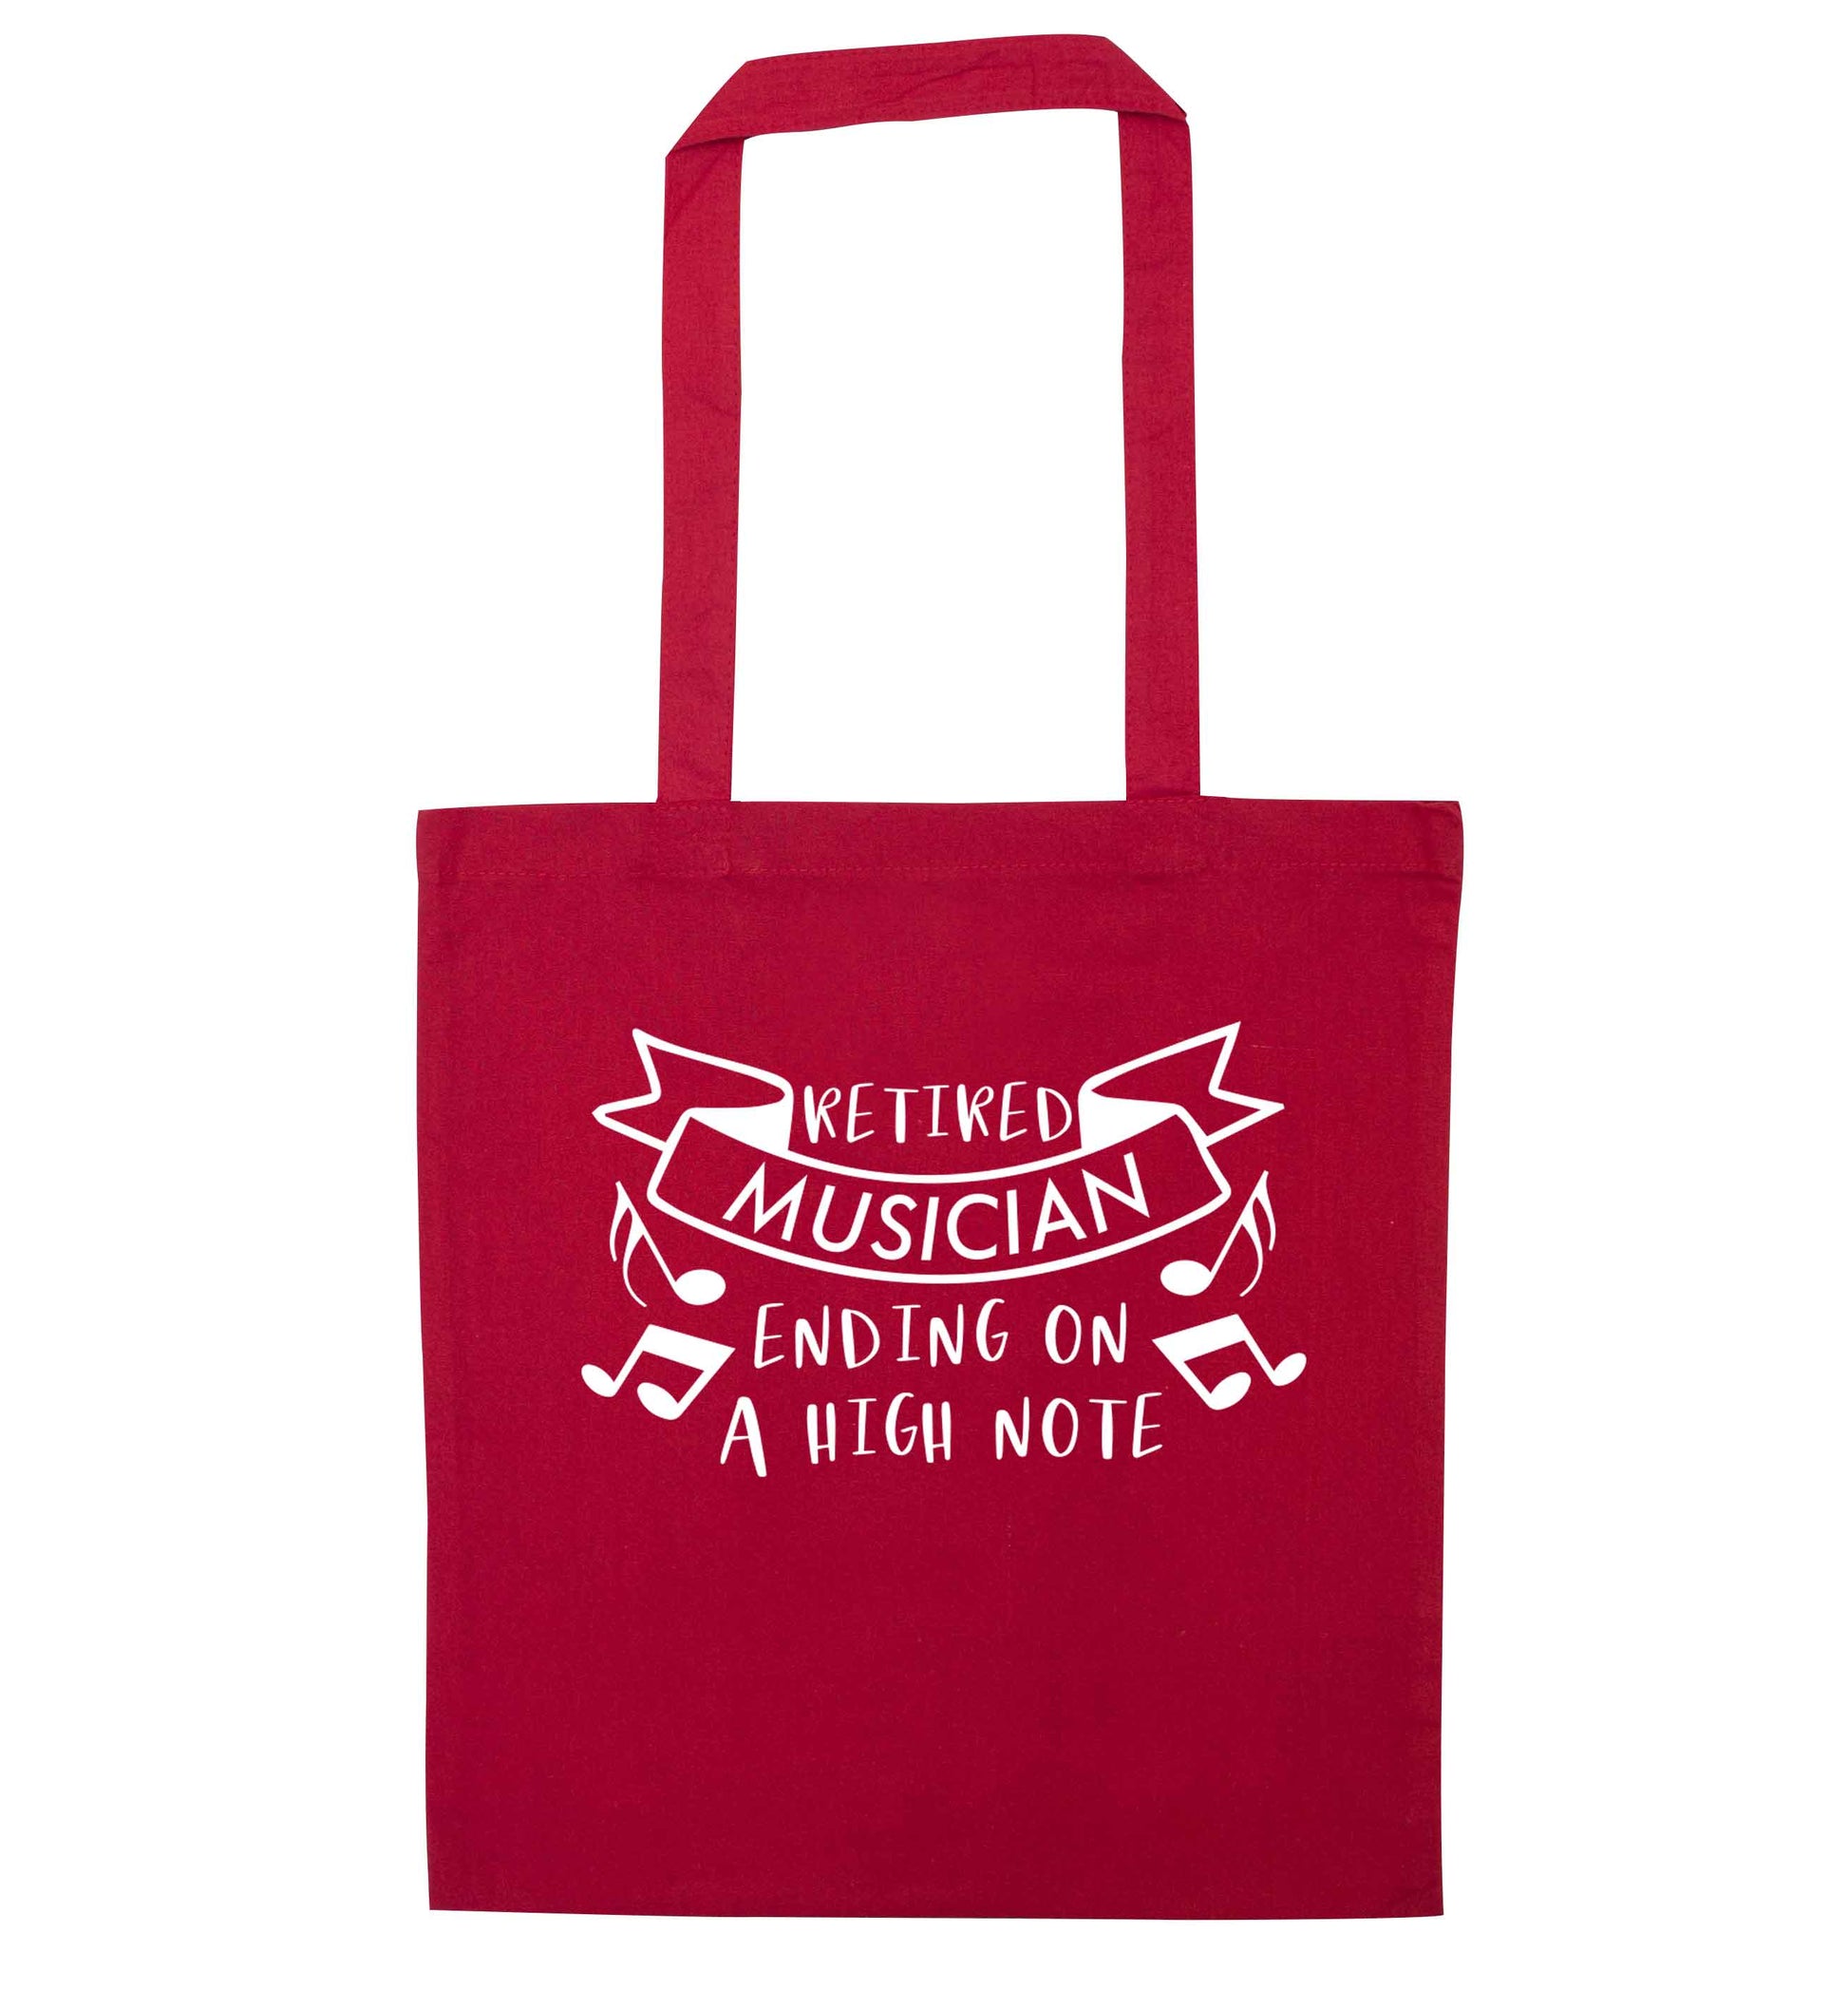 Retired musician ending on a high note red tote bag